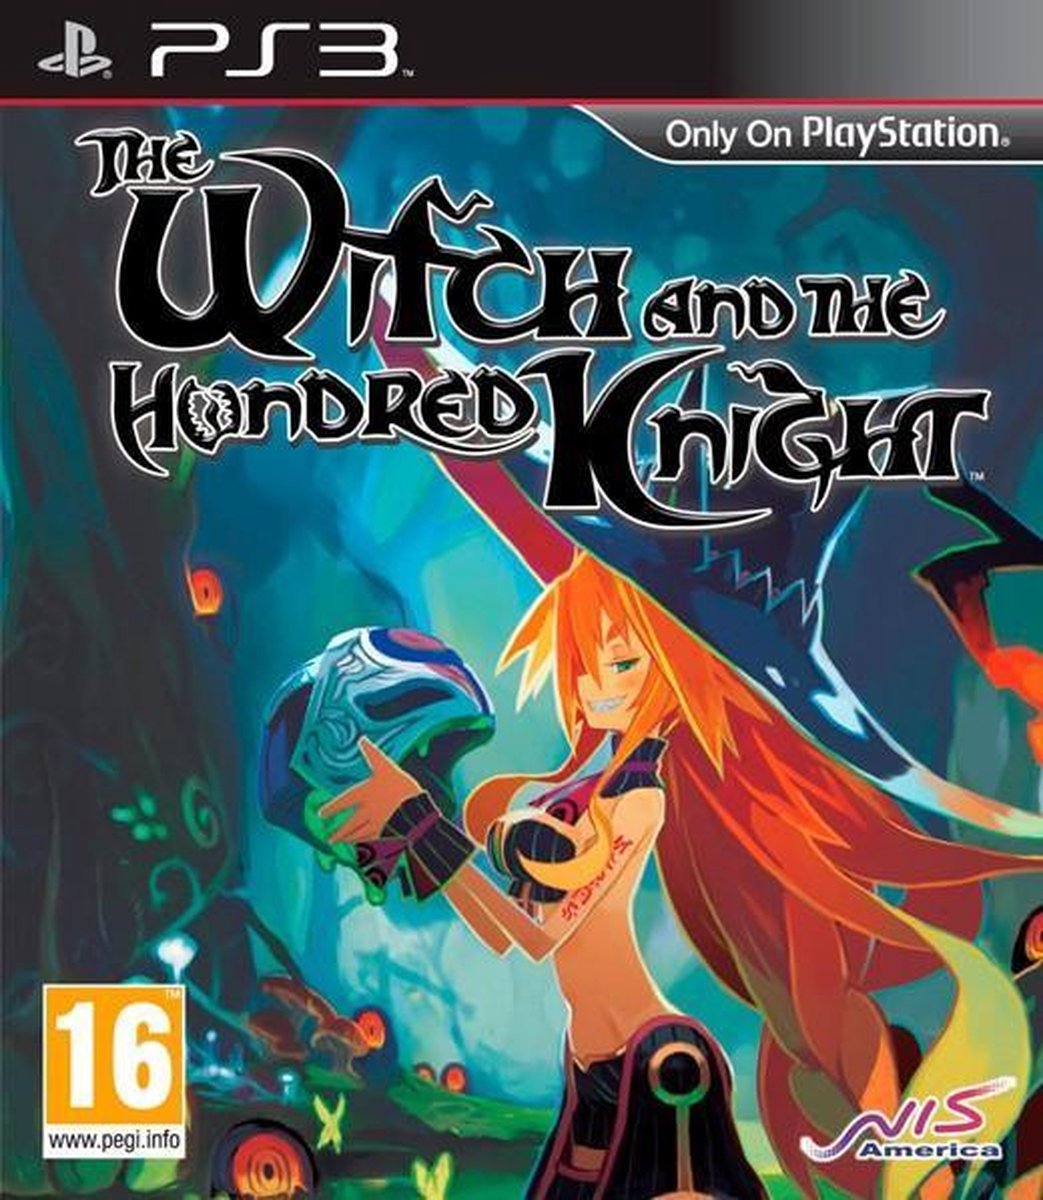 Nis Thech and the Hundred Knight - Wit